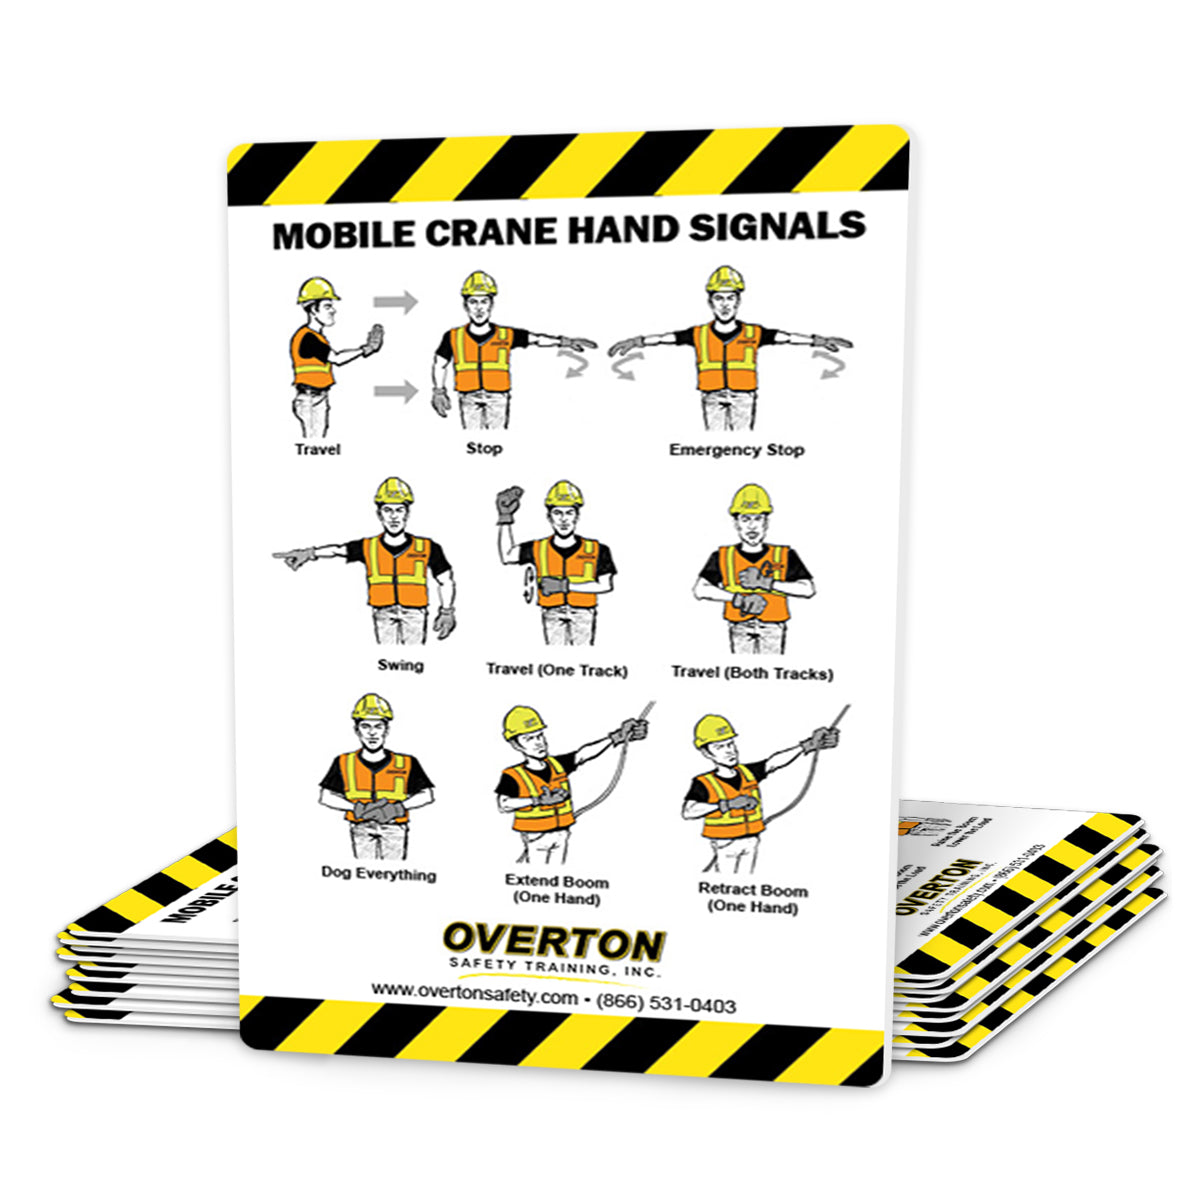 Mobile Crane Safety Hand Signal Cards (50 pk) Overton Safety Training